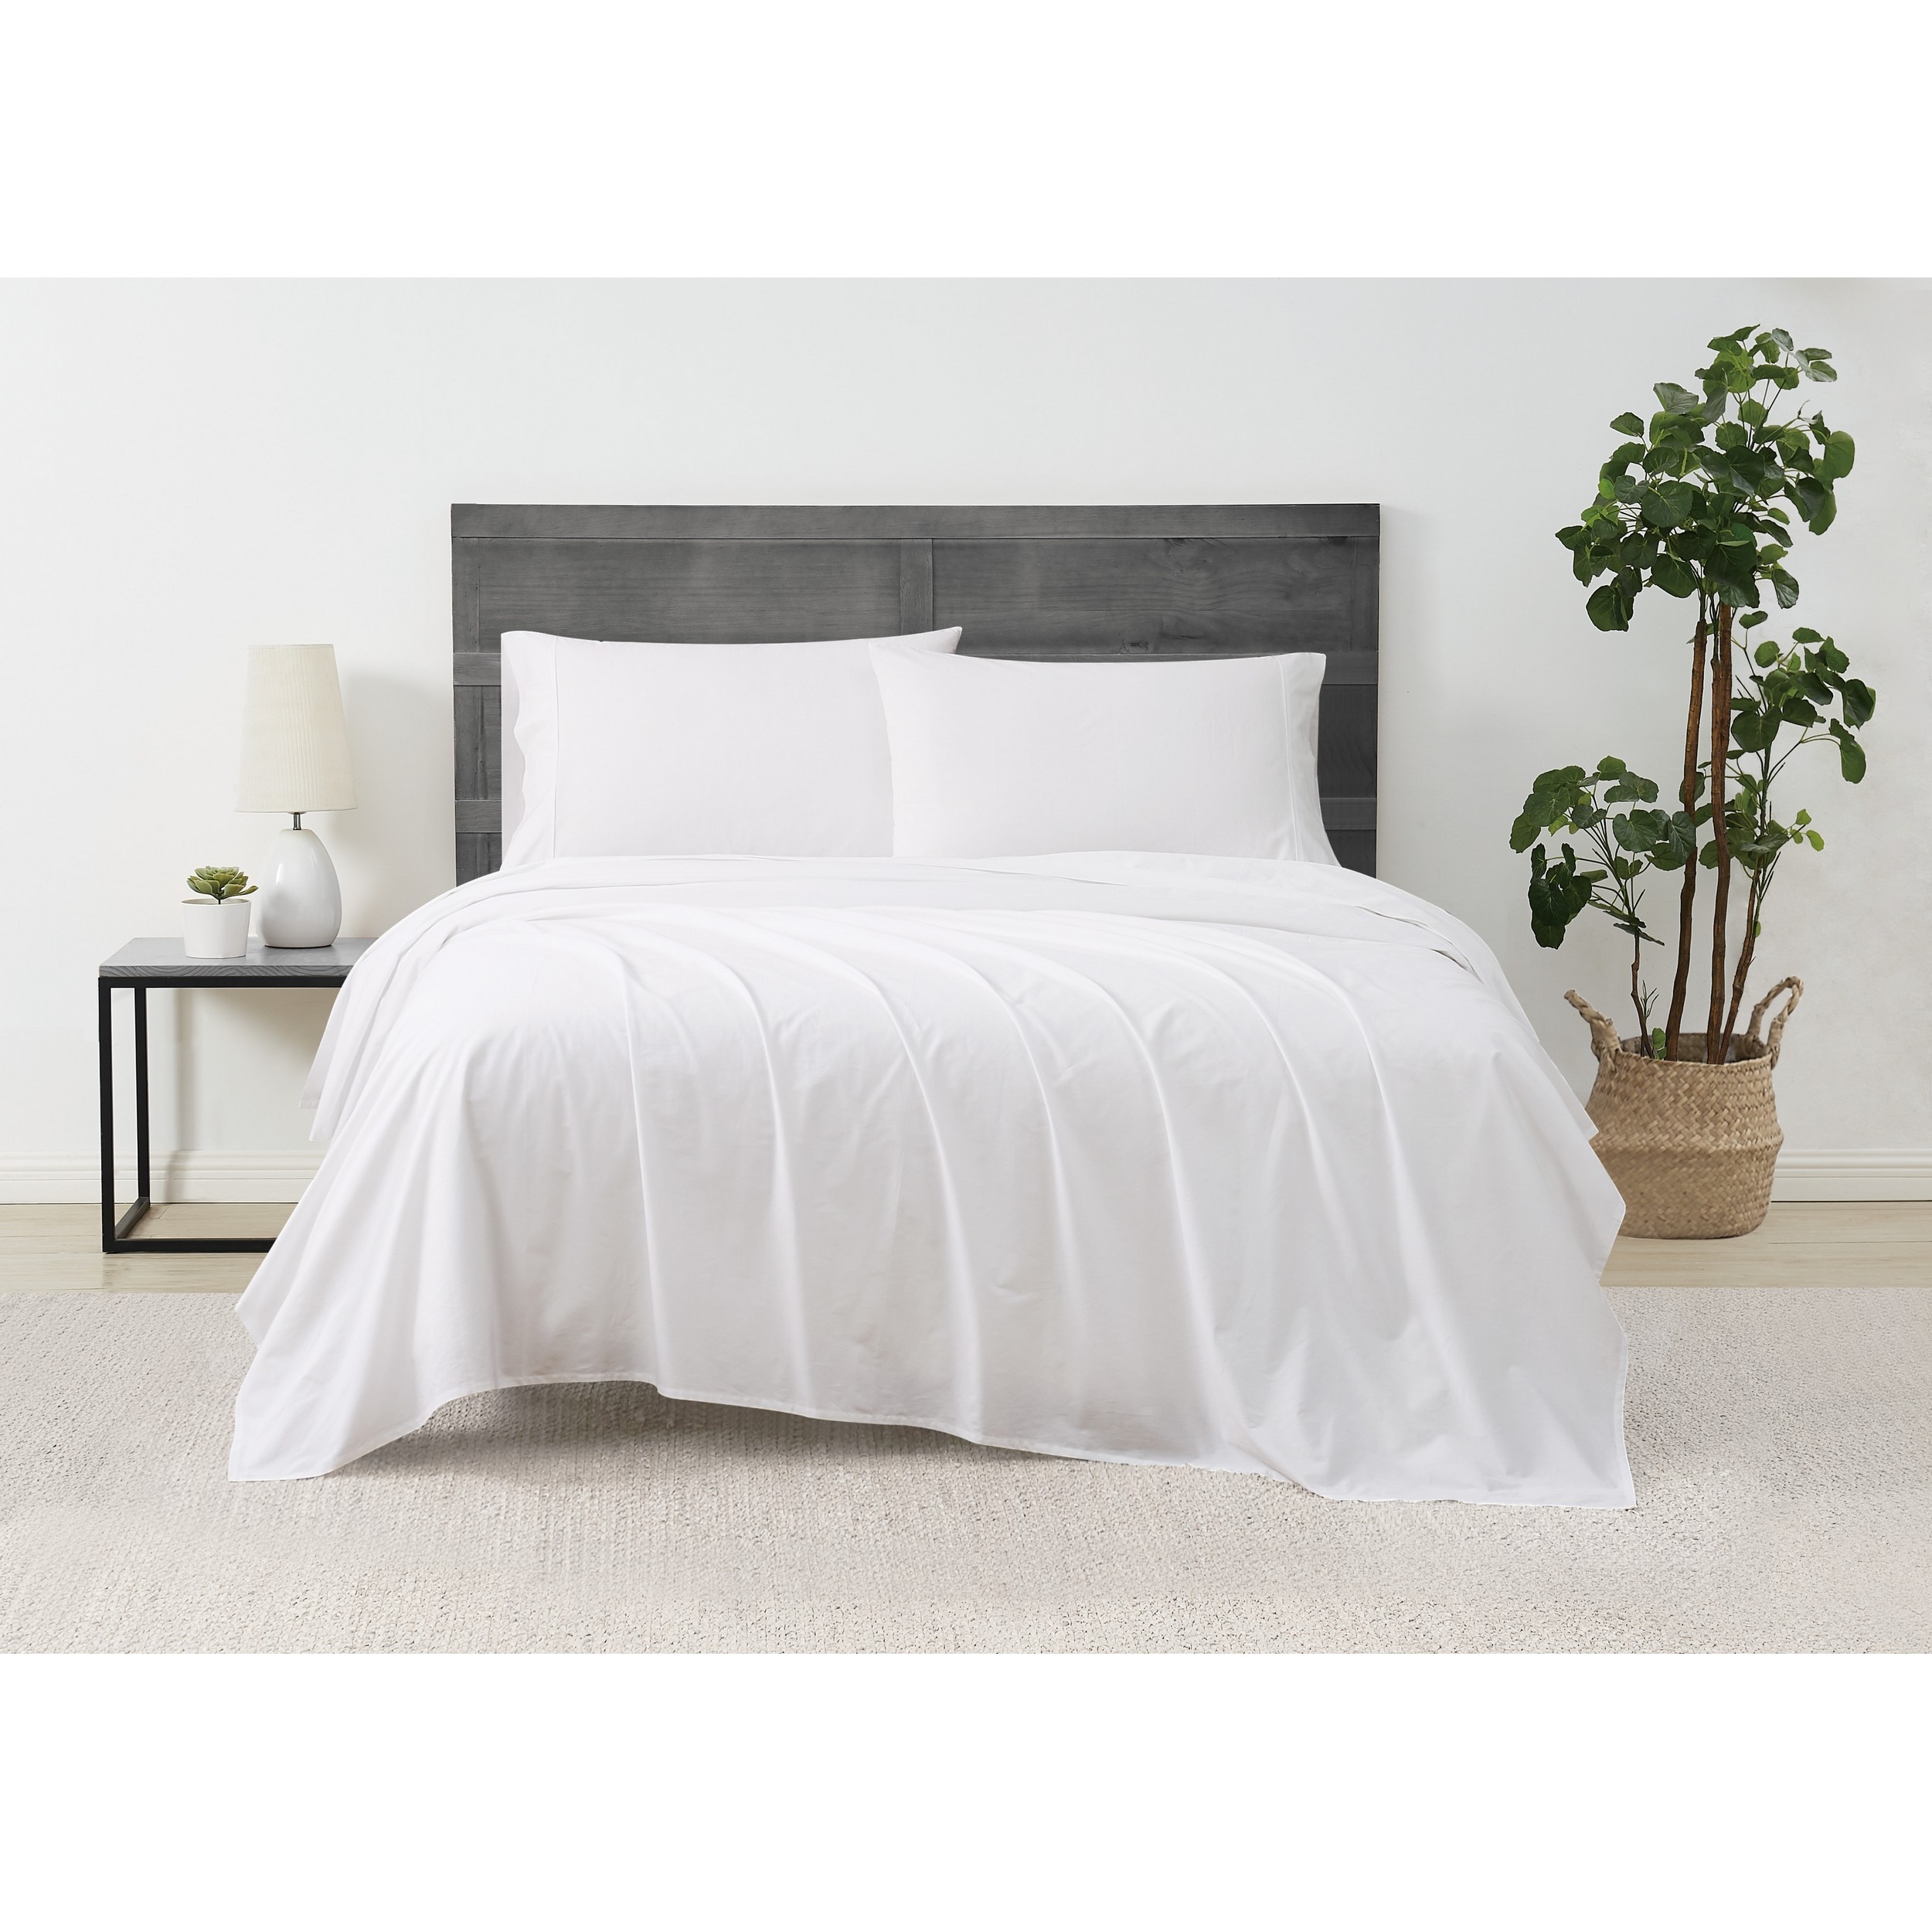 Cannon Bed Sheets at Lowes.com